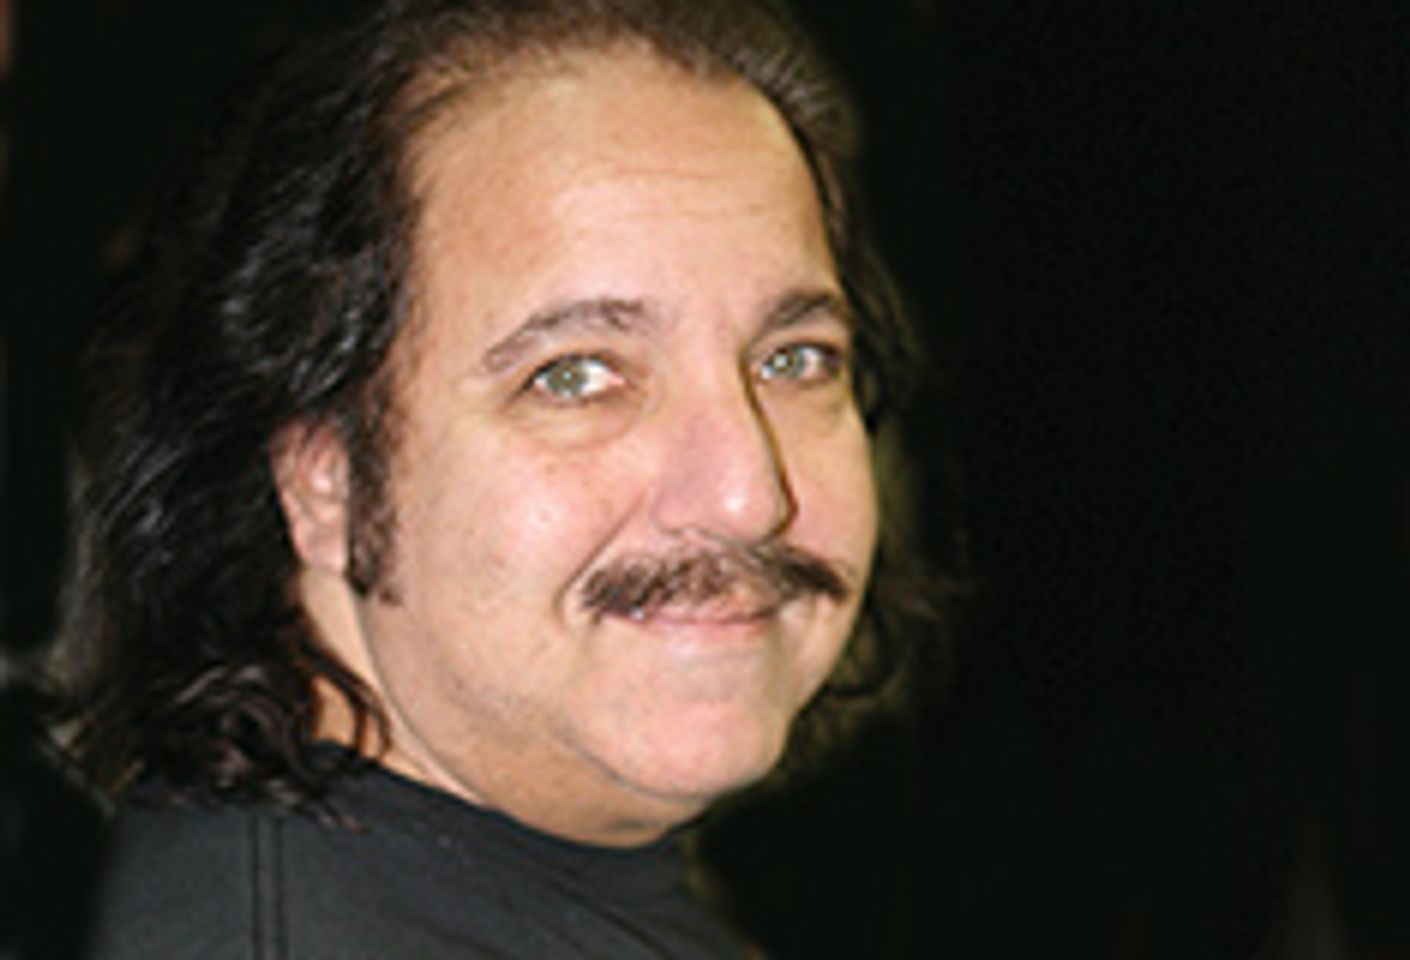 Canadian Officials Oppose Ron Jeremy Appearance